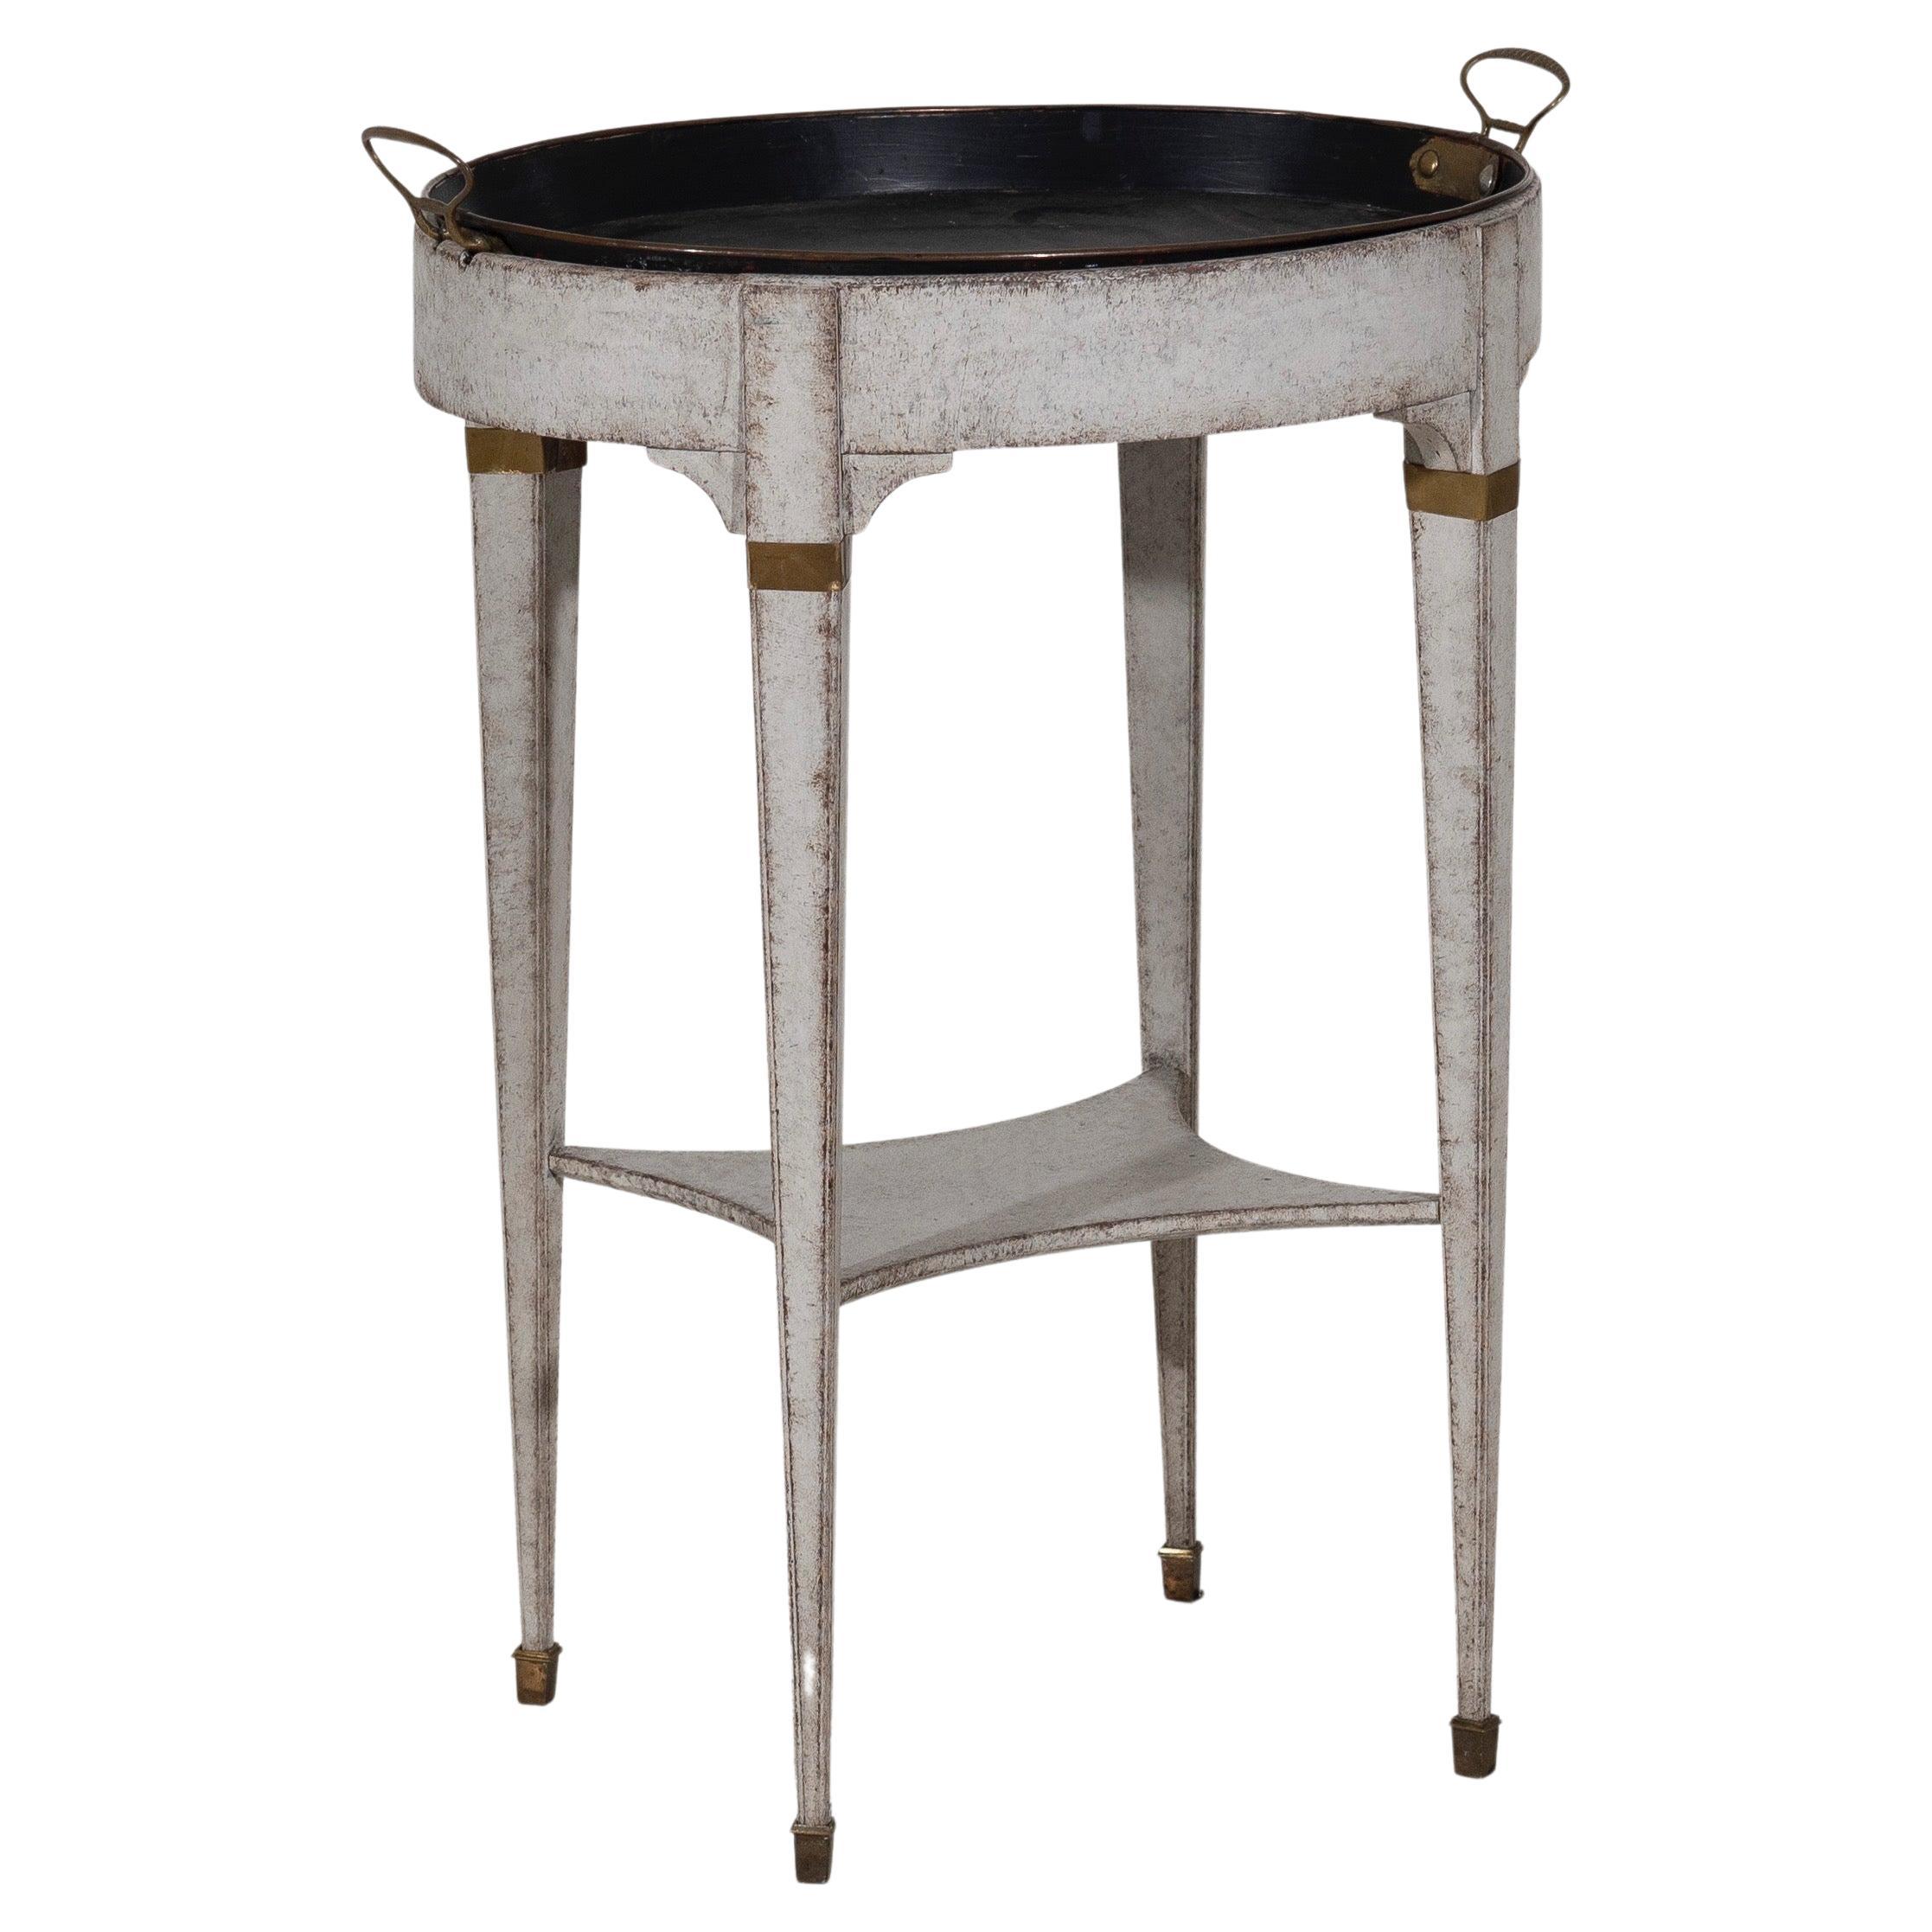 Trey-top table, freestanding, and with original metal trey. Swedish, circa 1810 For Sale